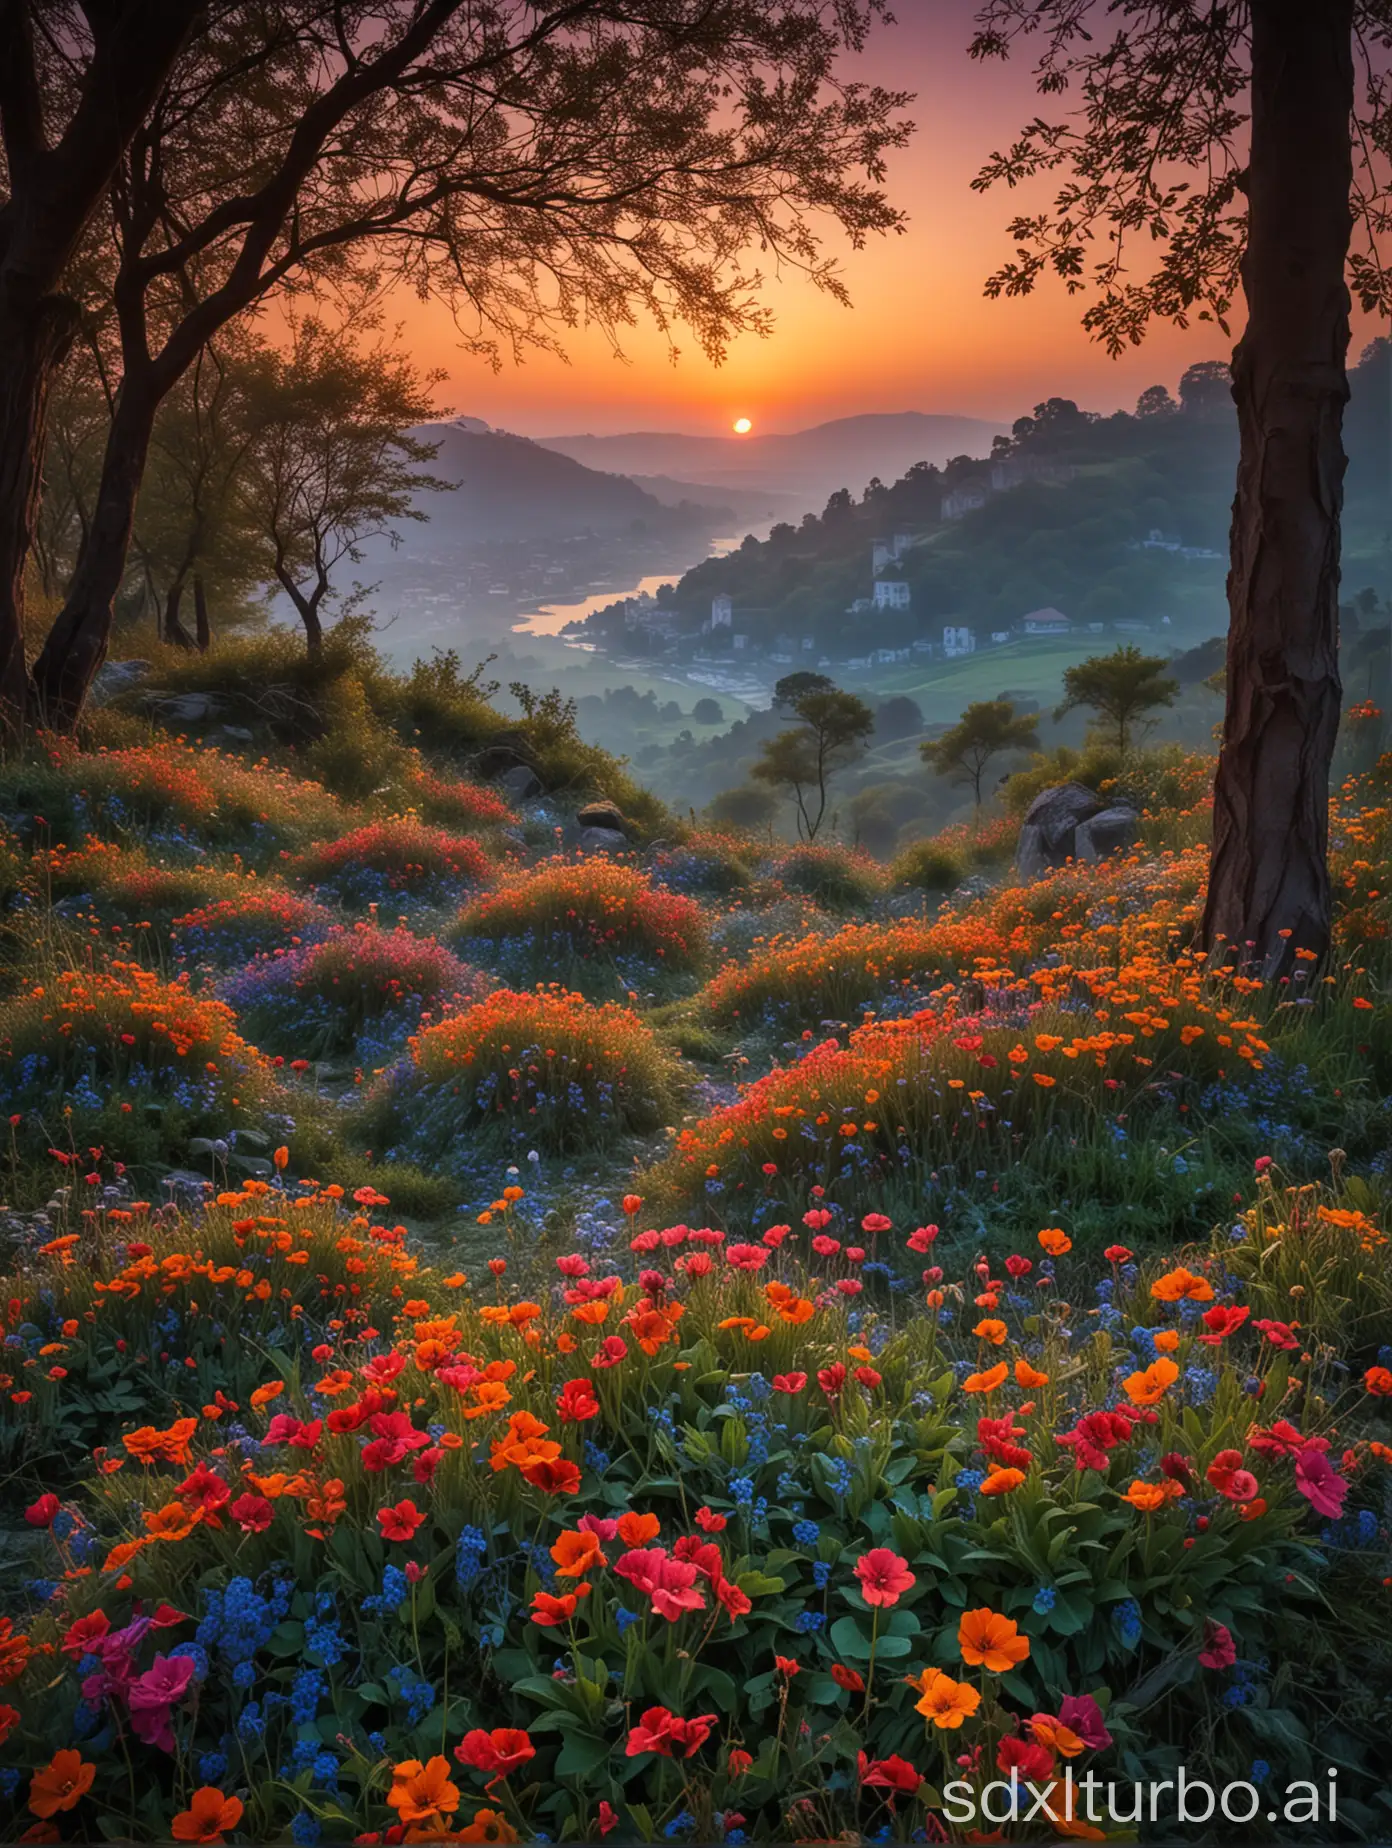 Dawn, flowers, mysterious, colorful, beautiful scenery, world heritage site, masterpiece